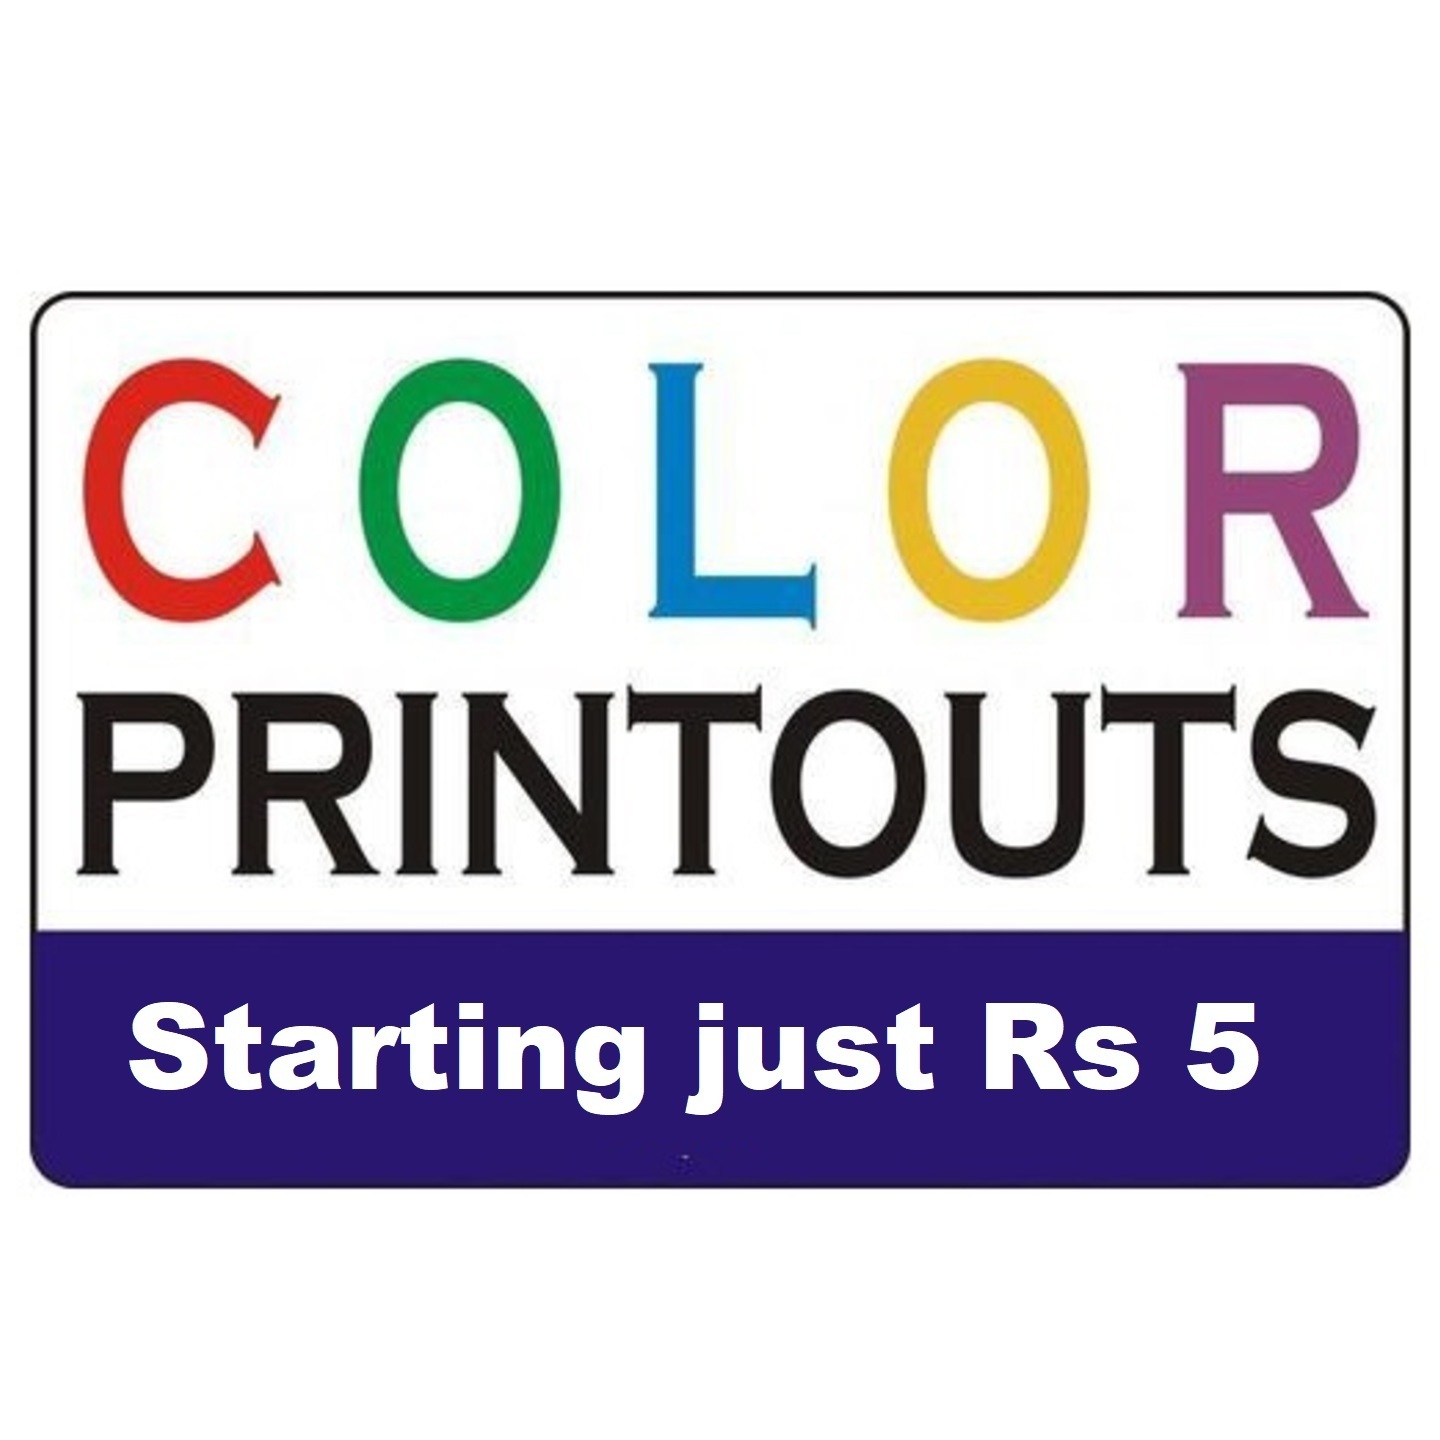 Color Printouts starting just Rs 5